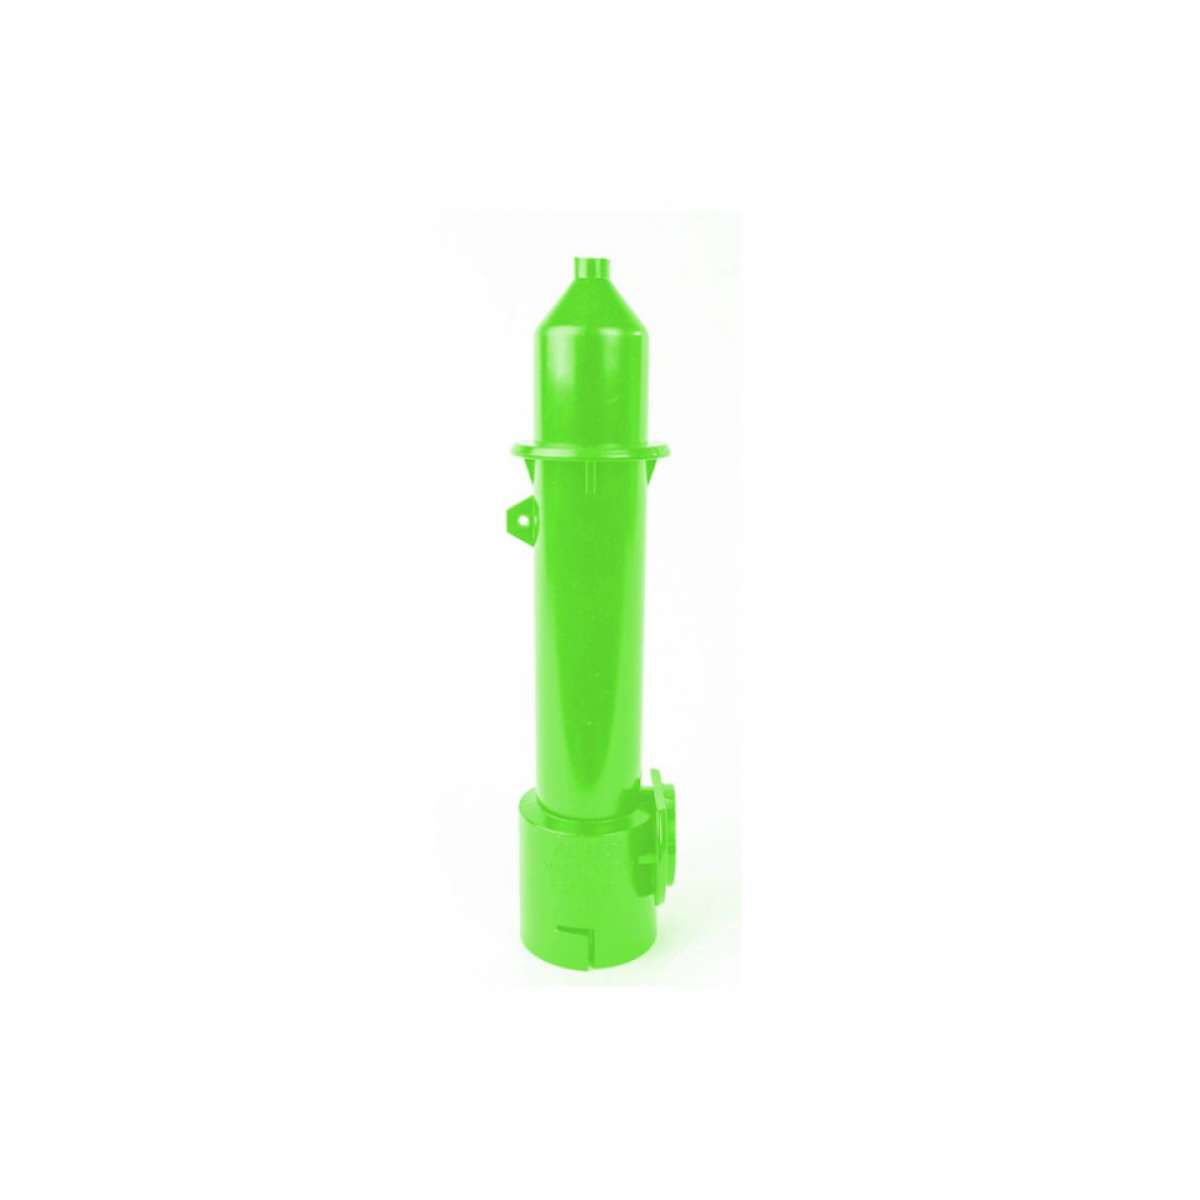 IsoLink 8" Rigid Spout with 1/4" Tip - Light Green